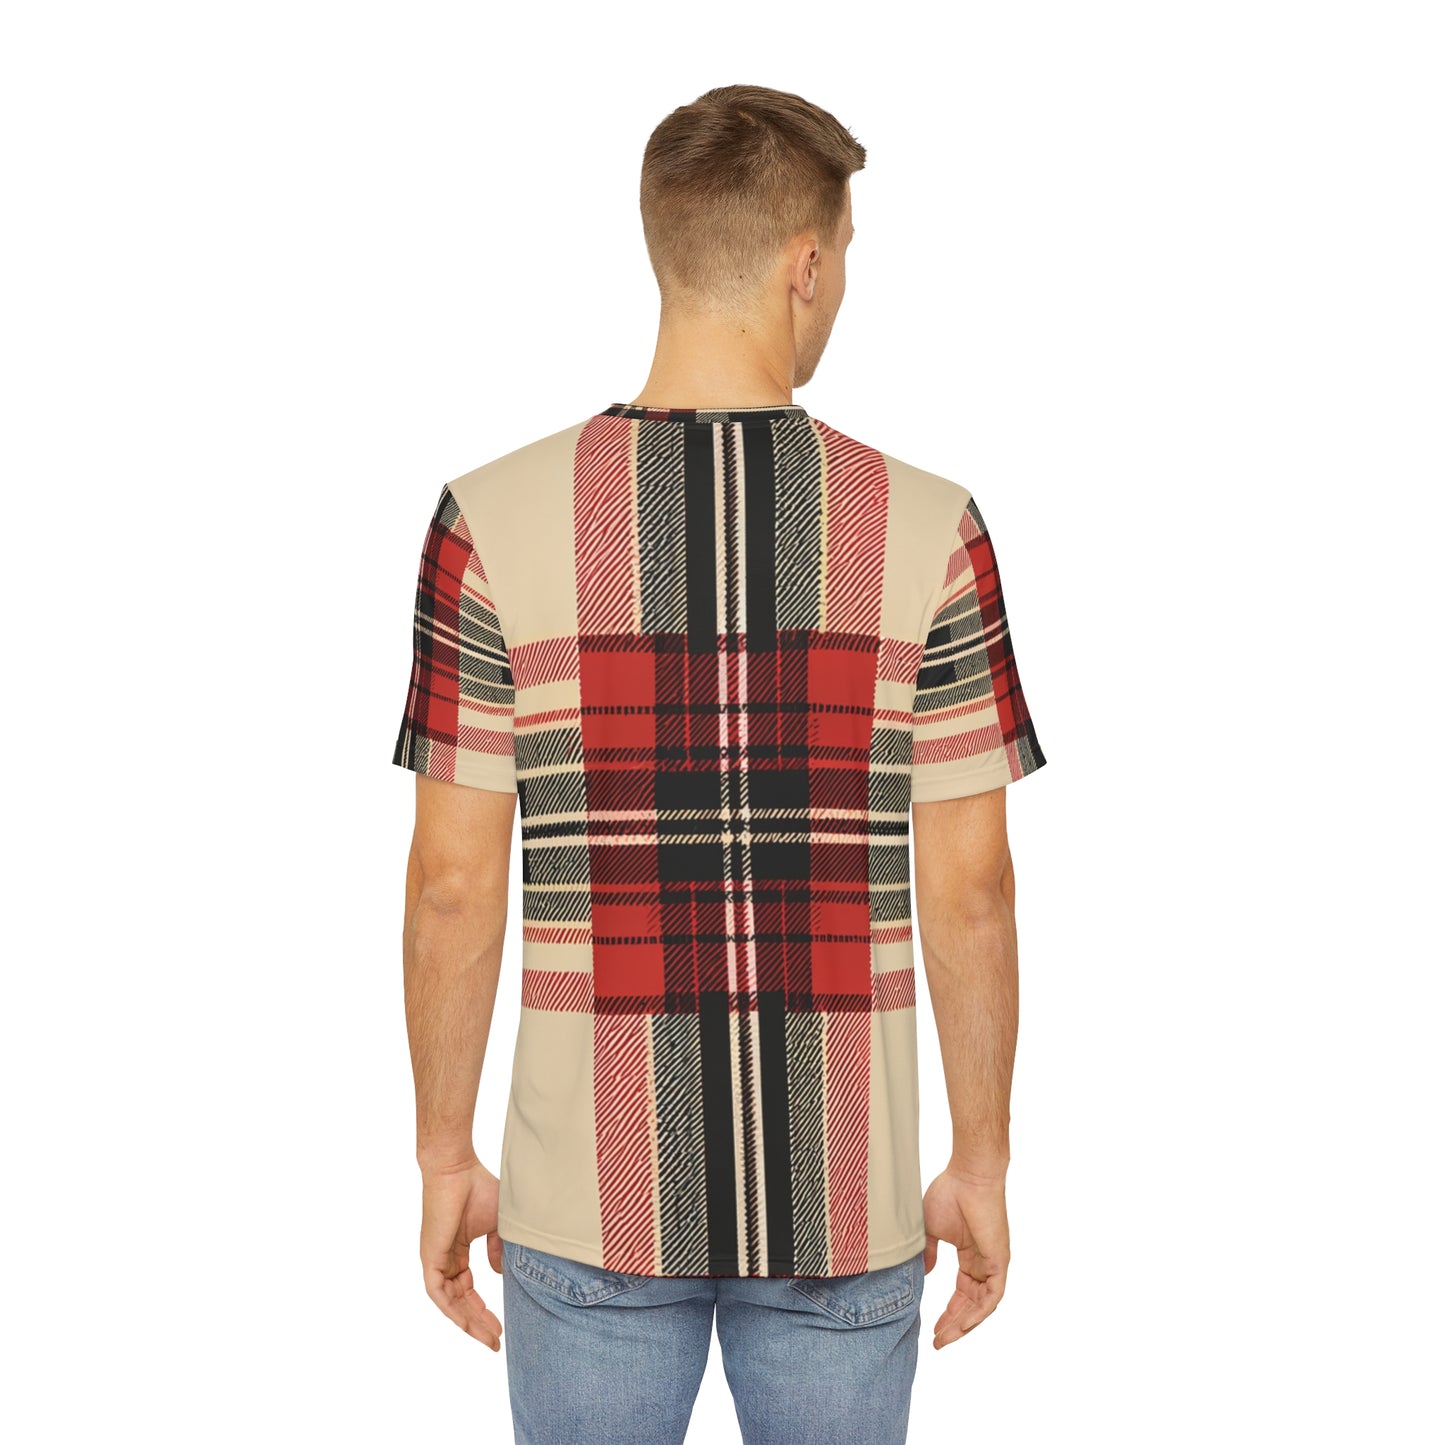 Back view of the Autumn Elegance Tartan Crewneck Pullover All-Over Print Short-Sleeved Shirt red black and beige background plaid pattern paired with casual denim pants worn by a white man